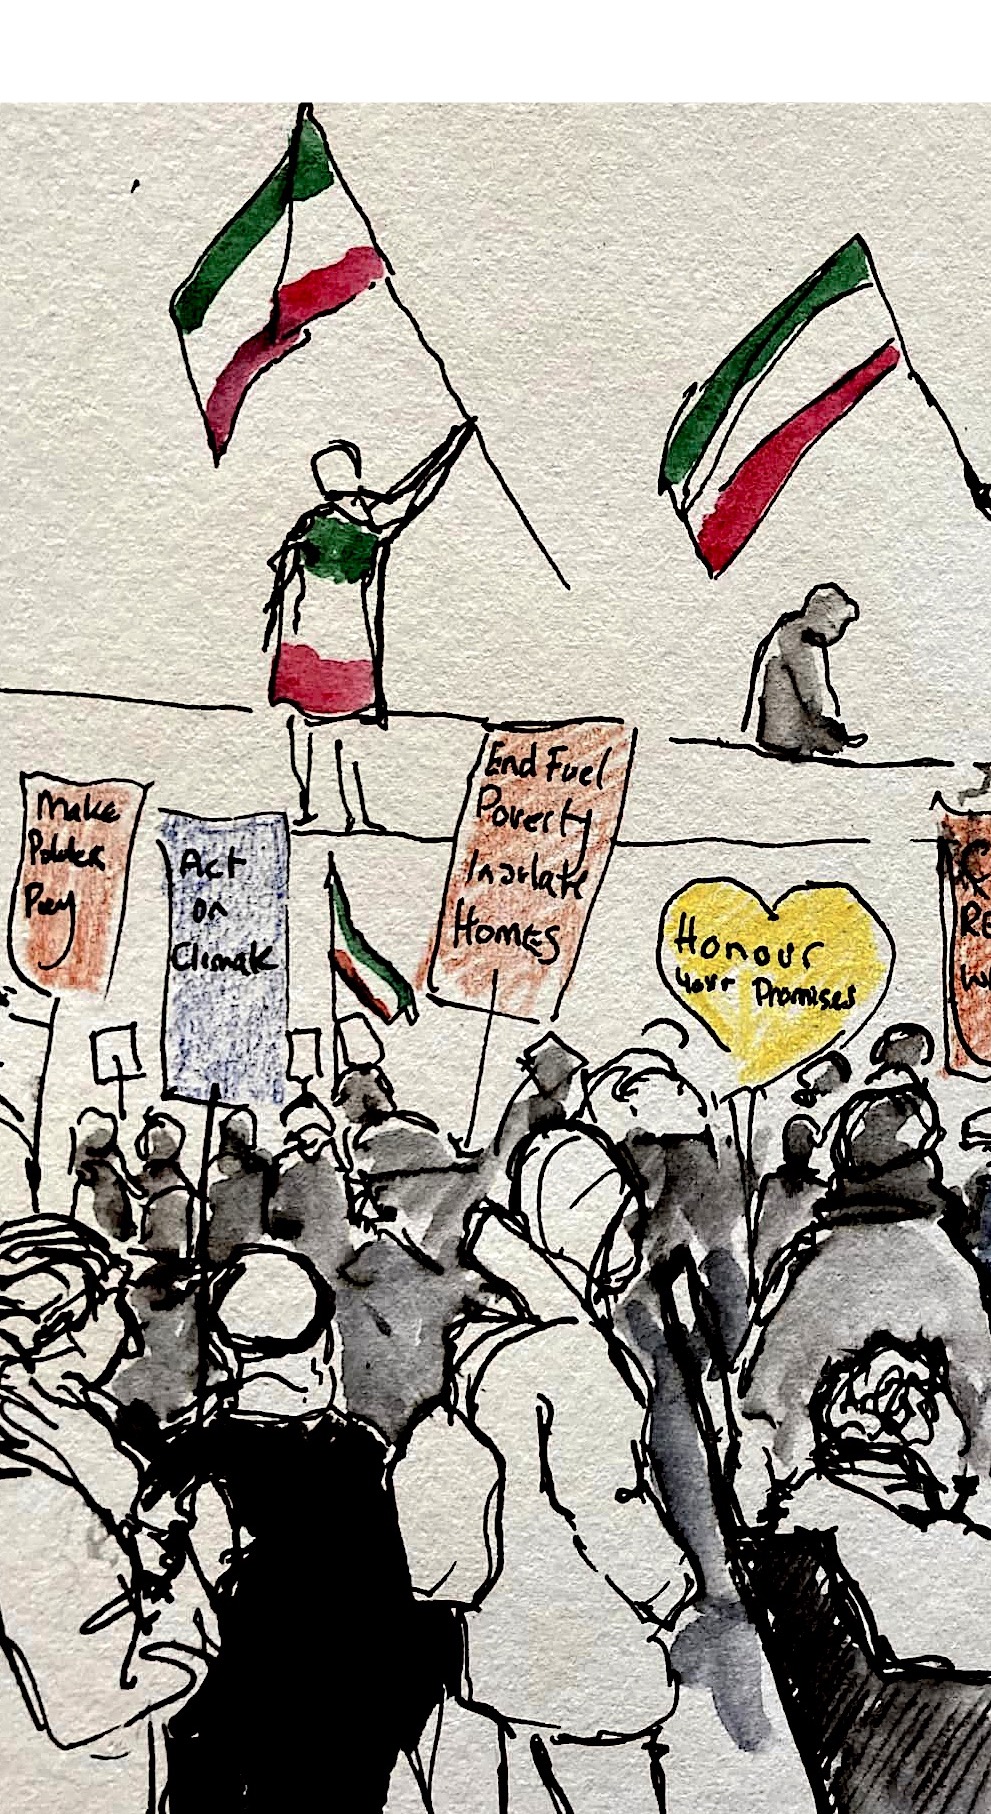 Drawing of a demonstration in Trafalgar Square